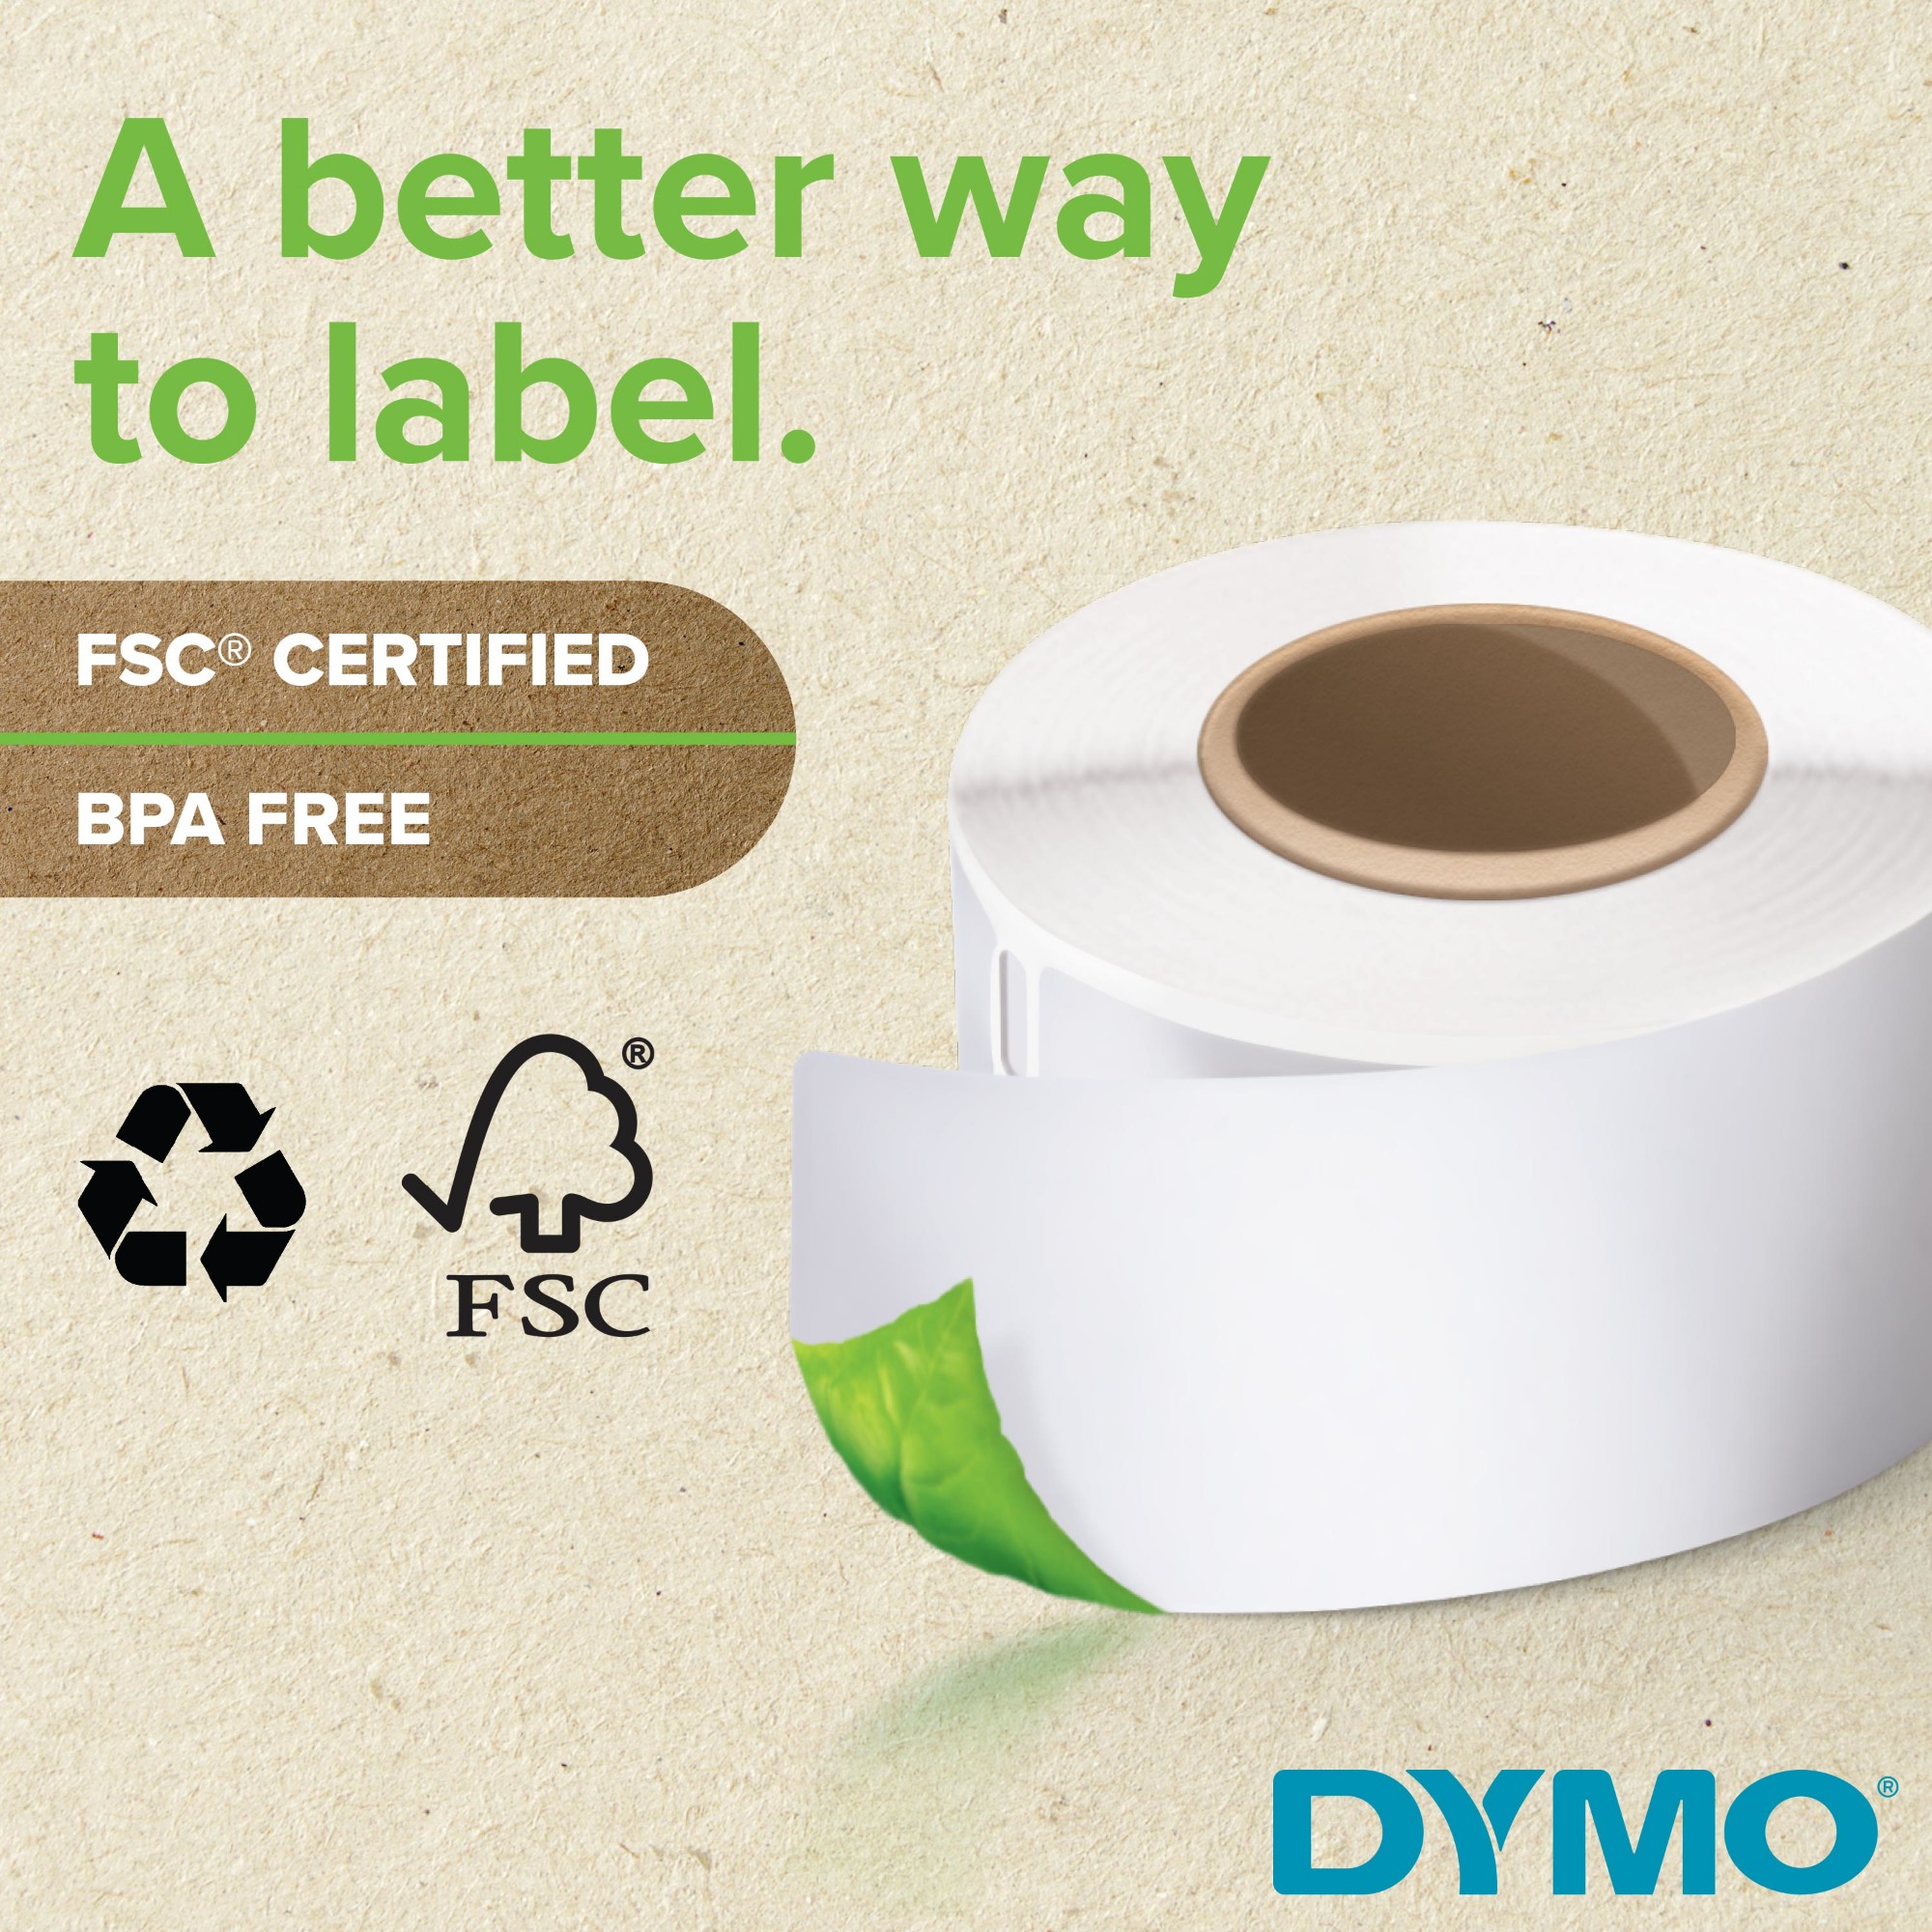 Dymo 11354 LabelWriter Labels 57mmx32mm White (Pack of 1000) S0722540